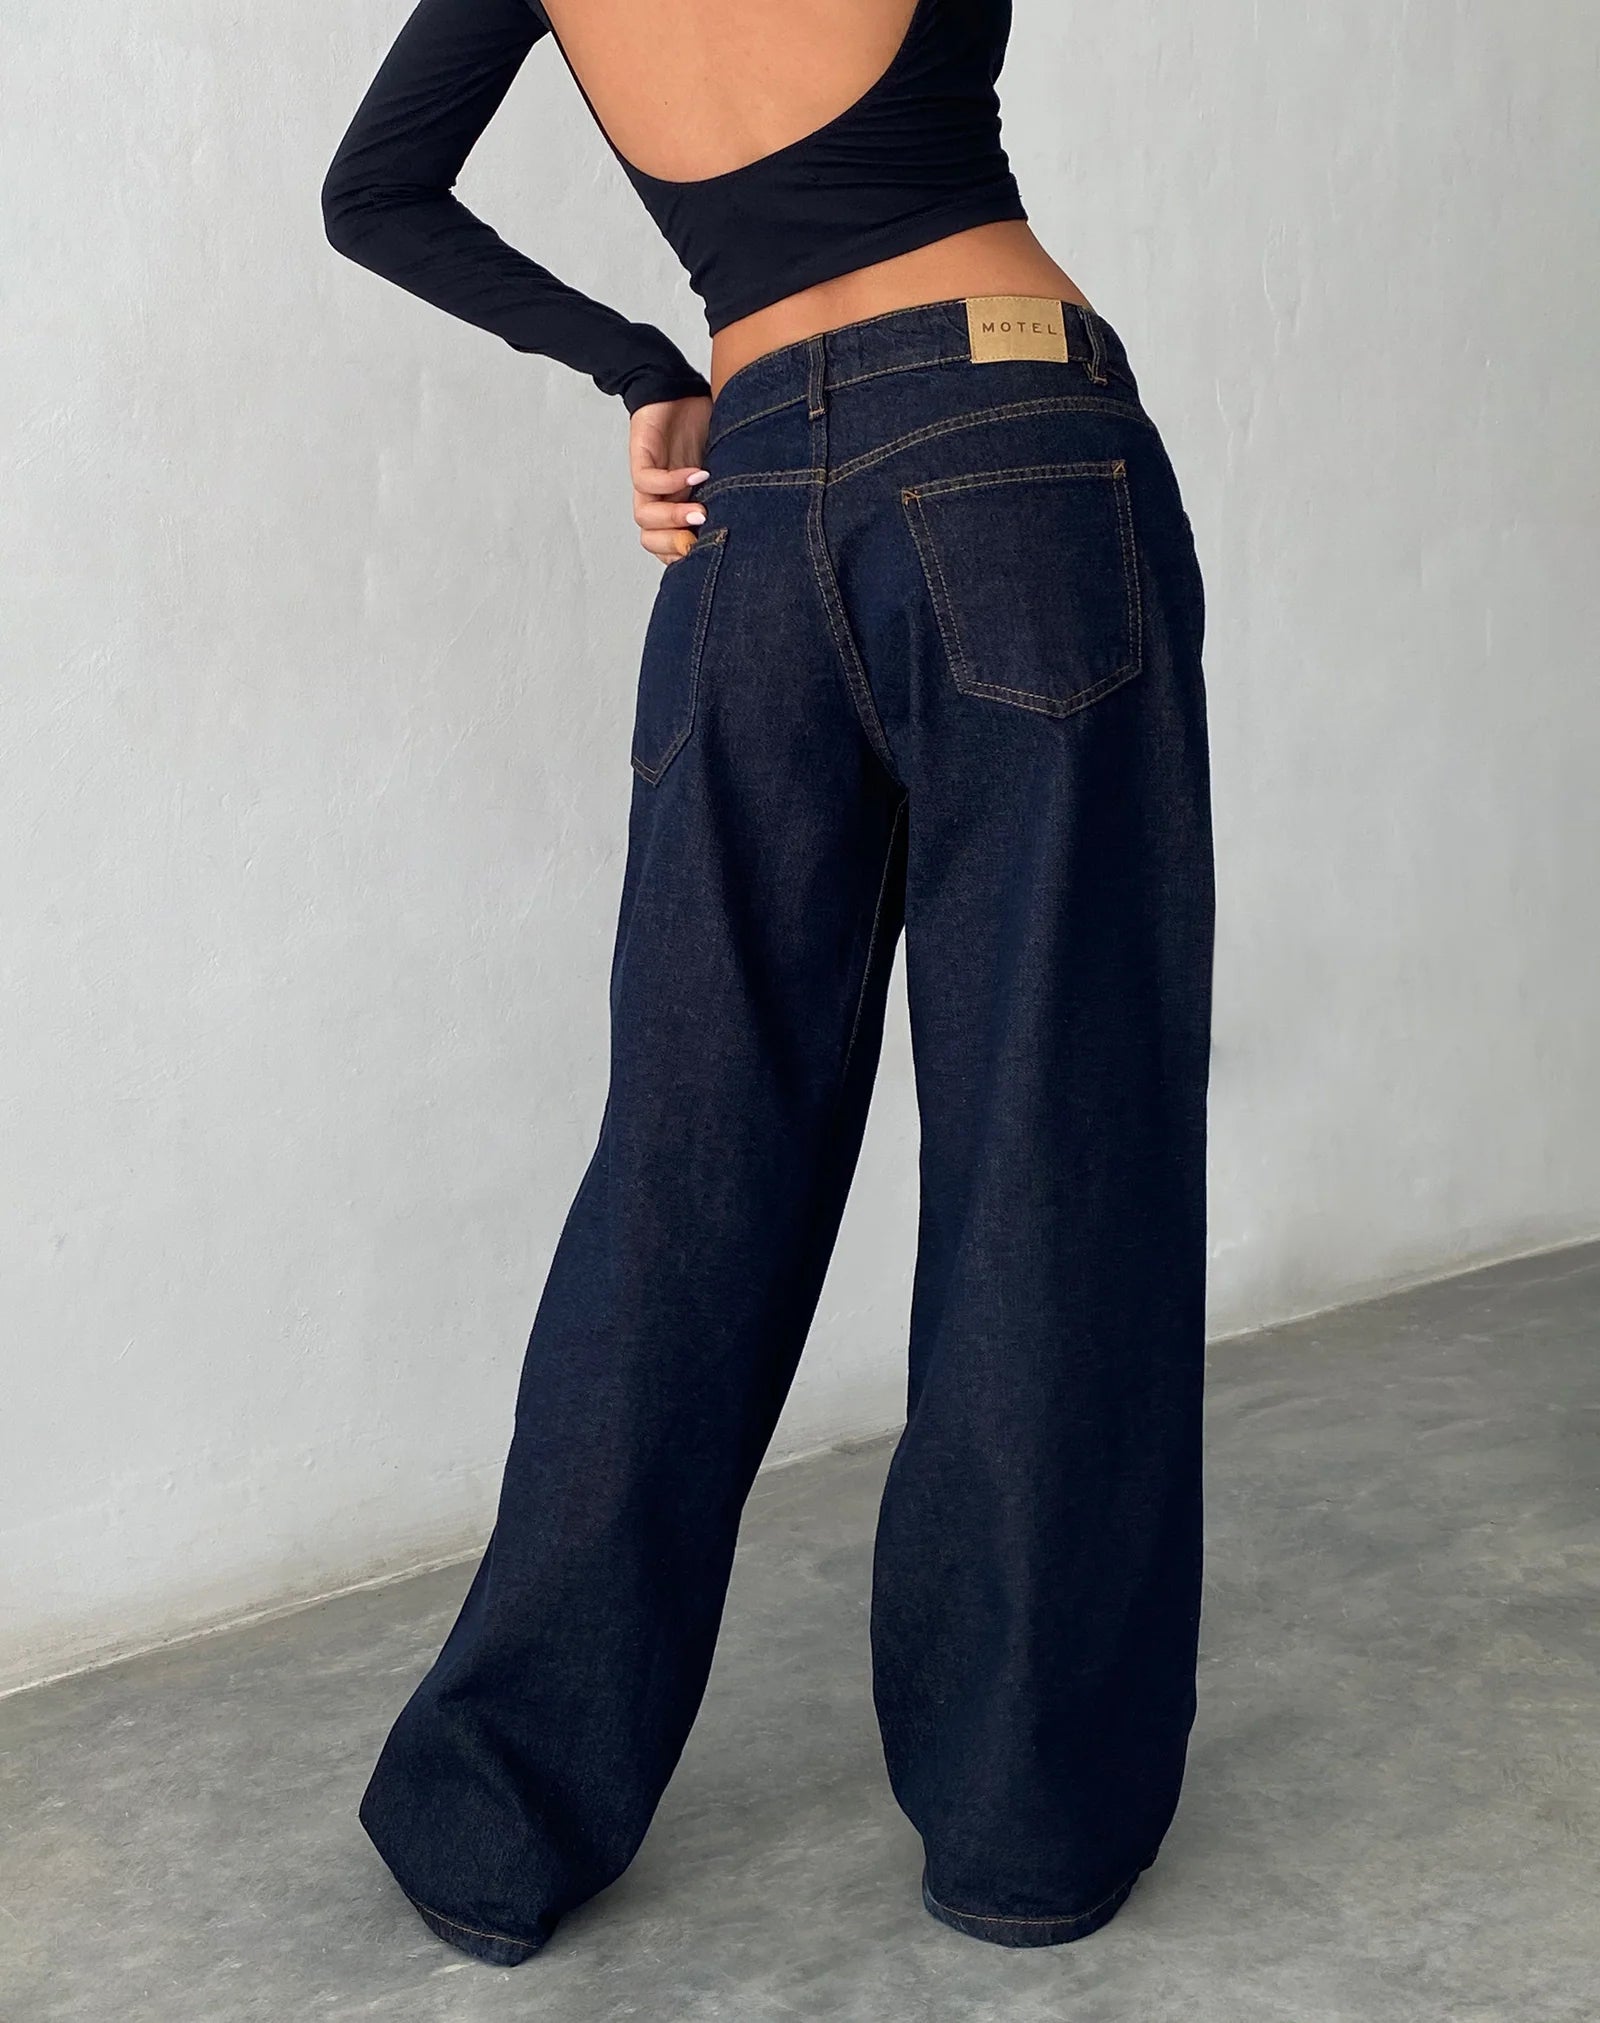 image of Roomy Extra Wide Low Rise Jeans in Indigo